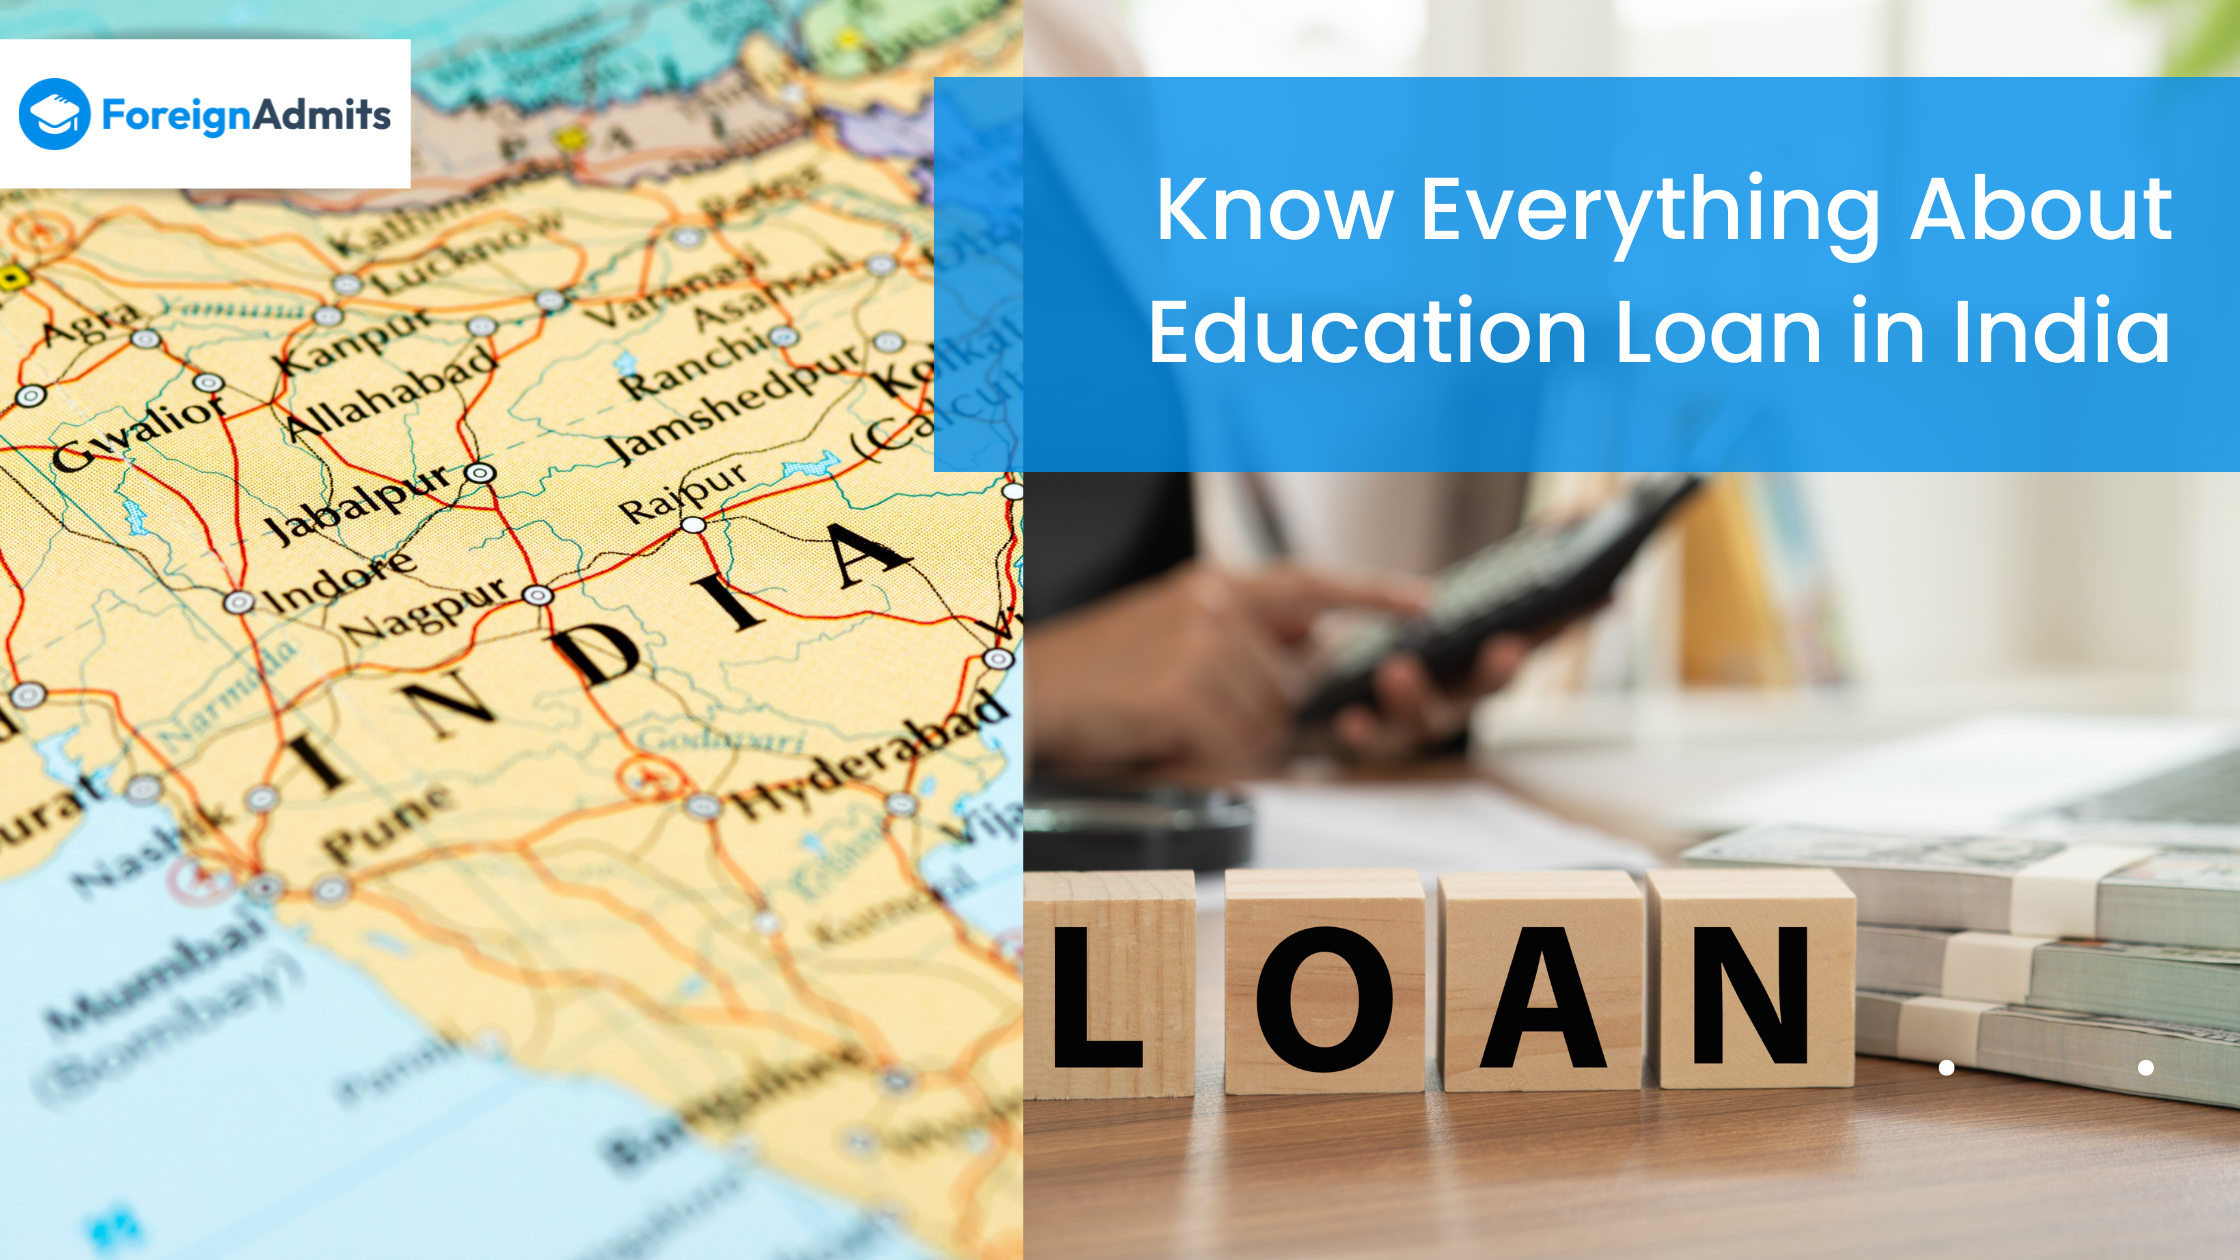 Here is All You Need To Know About Education Loan in India